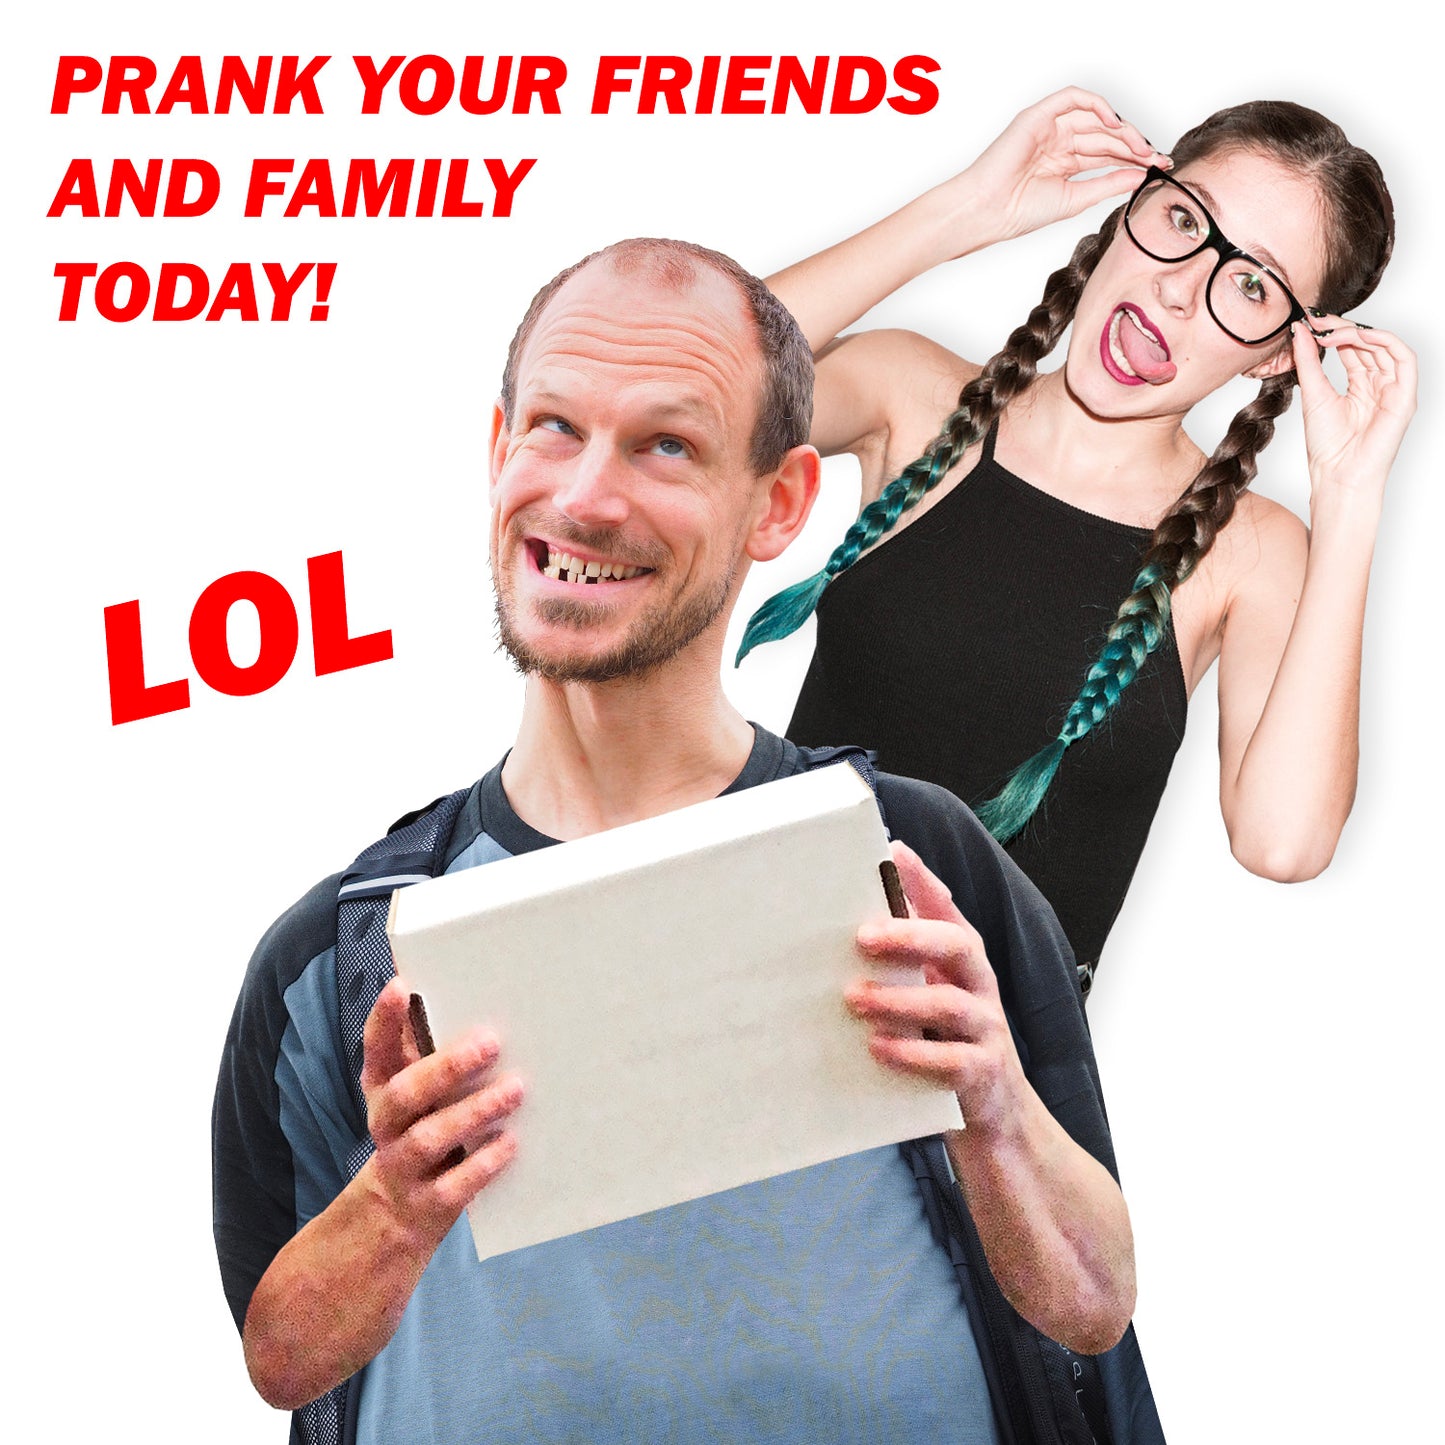 Butt Hole Of The Month Club embarrassing prank box gets mailed directly to your victims 100% anonymously!